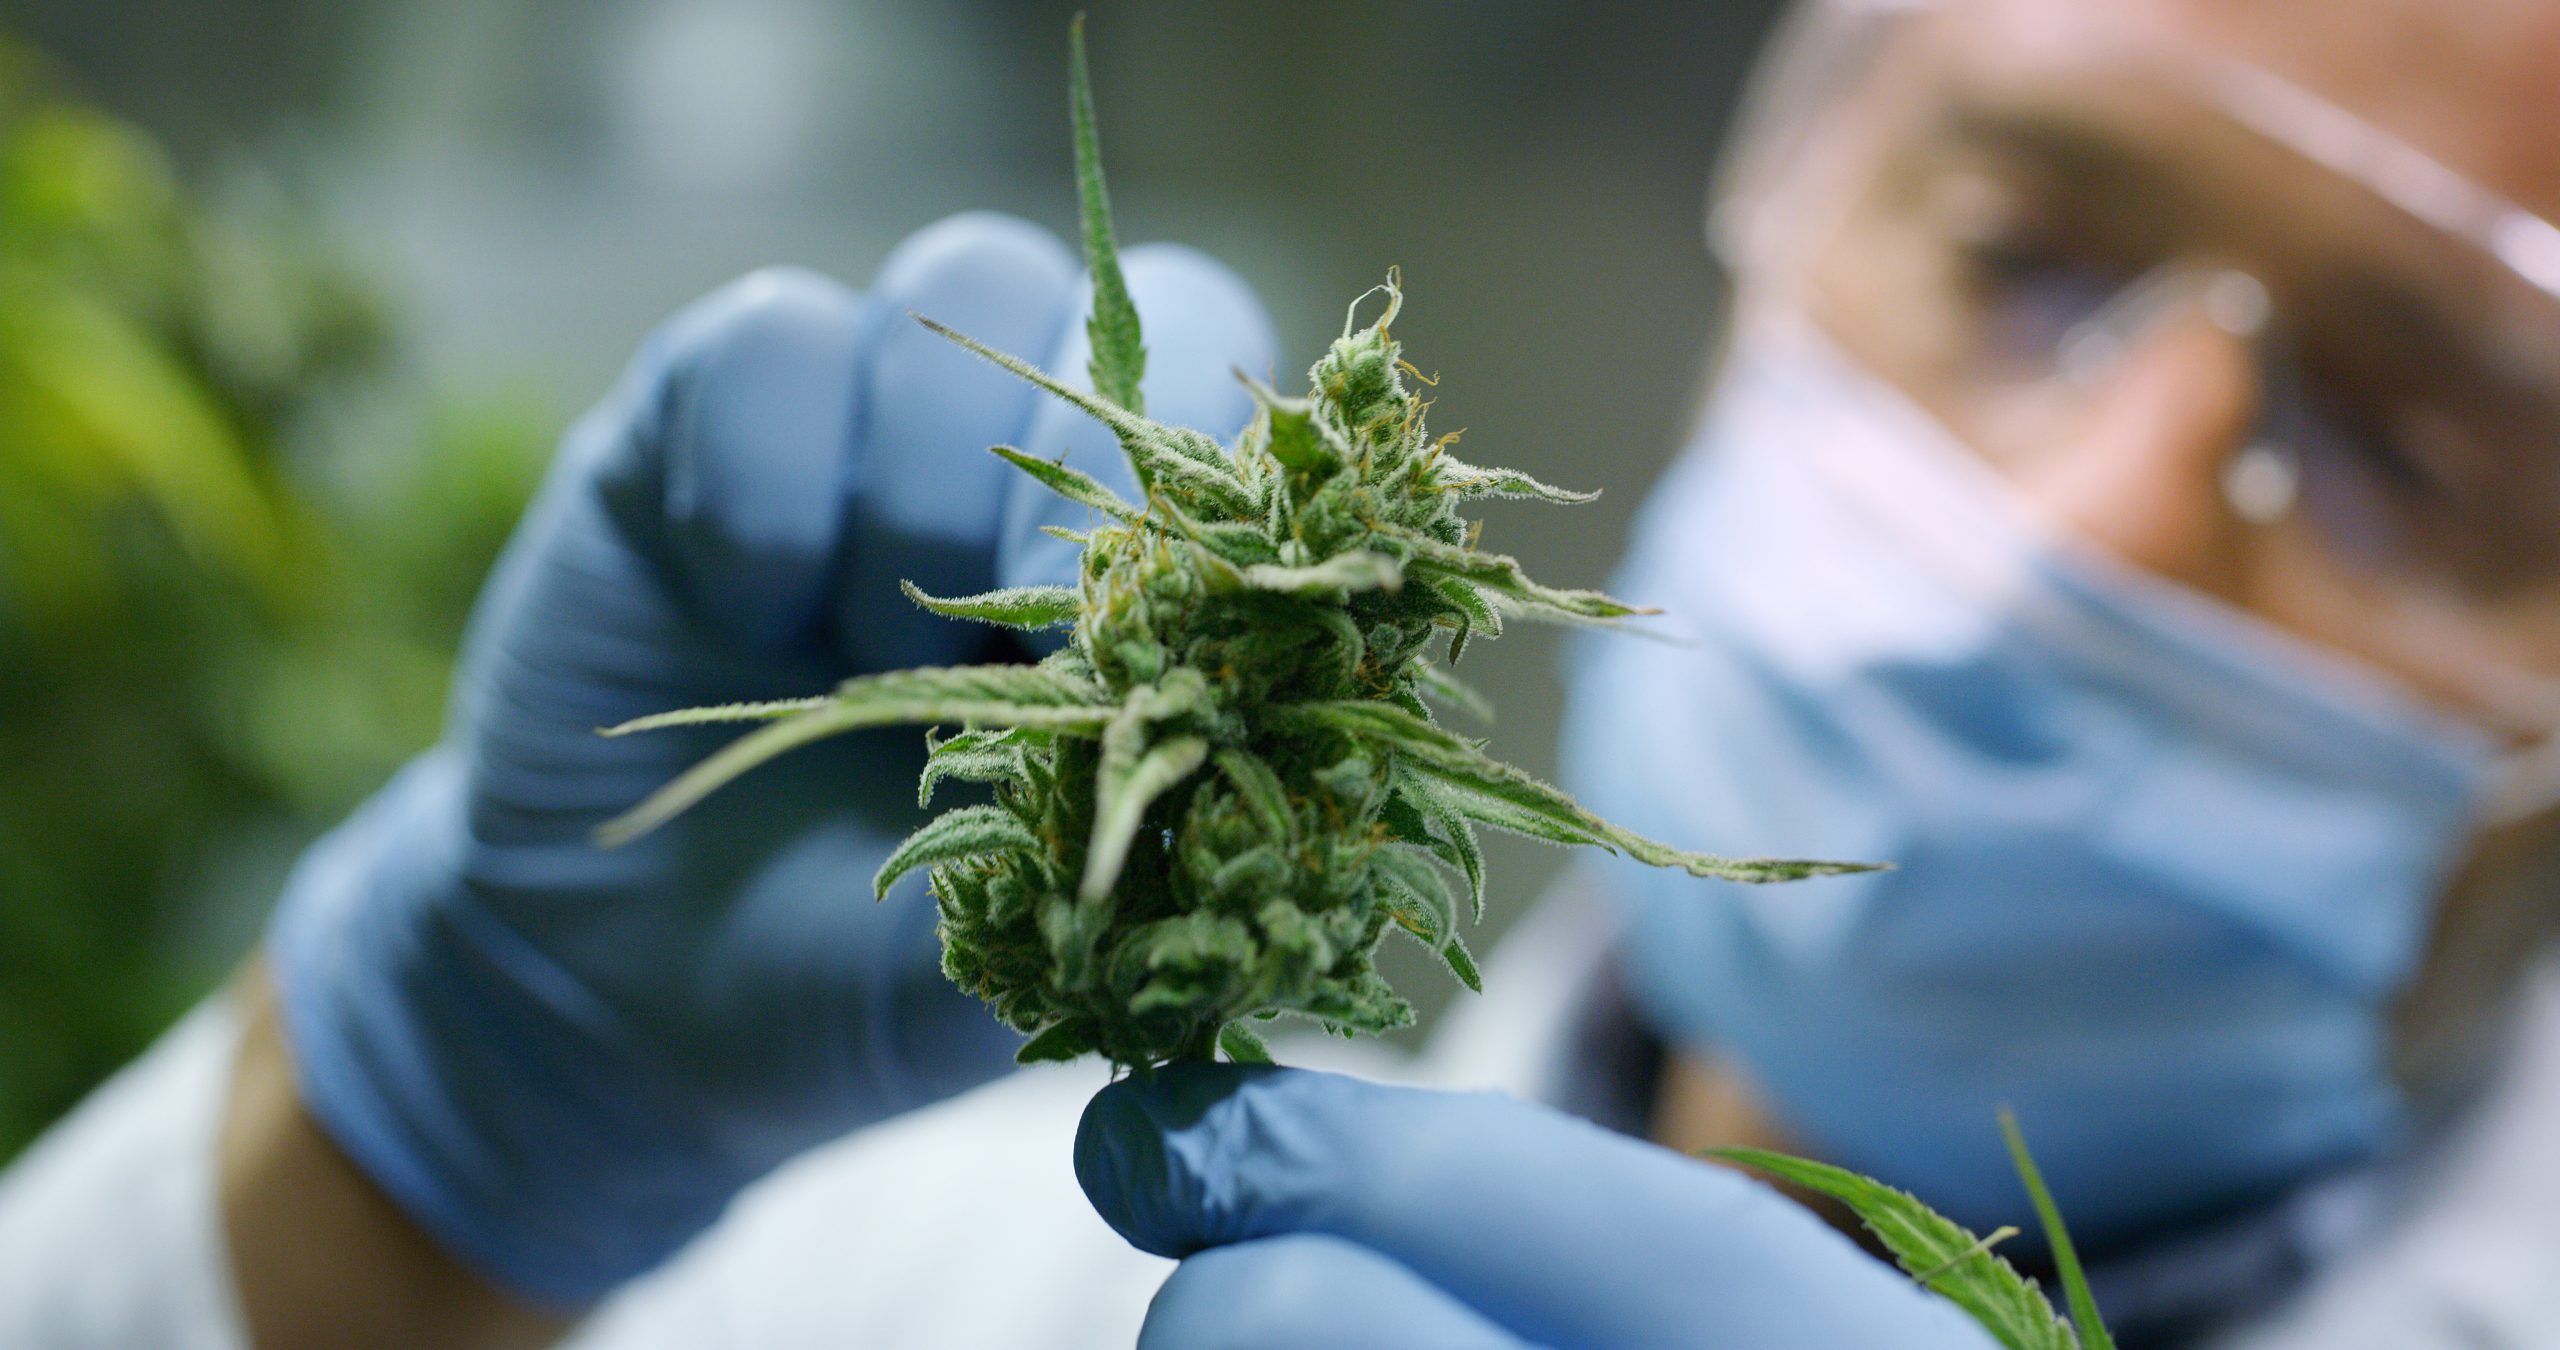 Trichome Pharma receives approval to cultivate cannabis for research